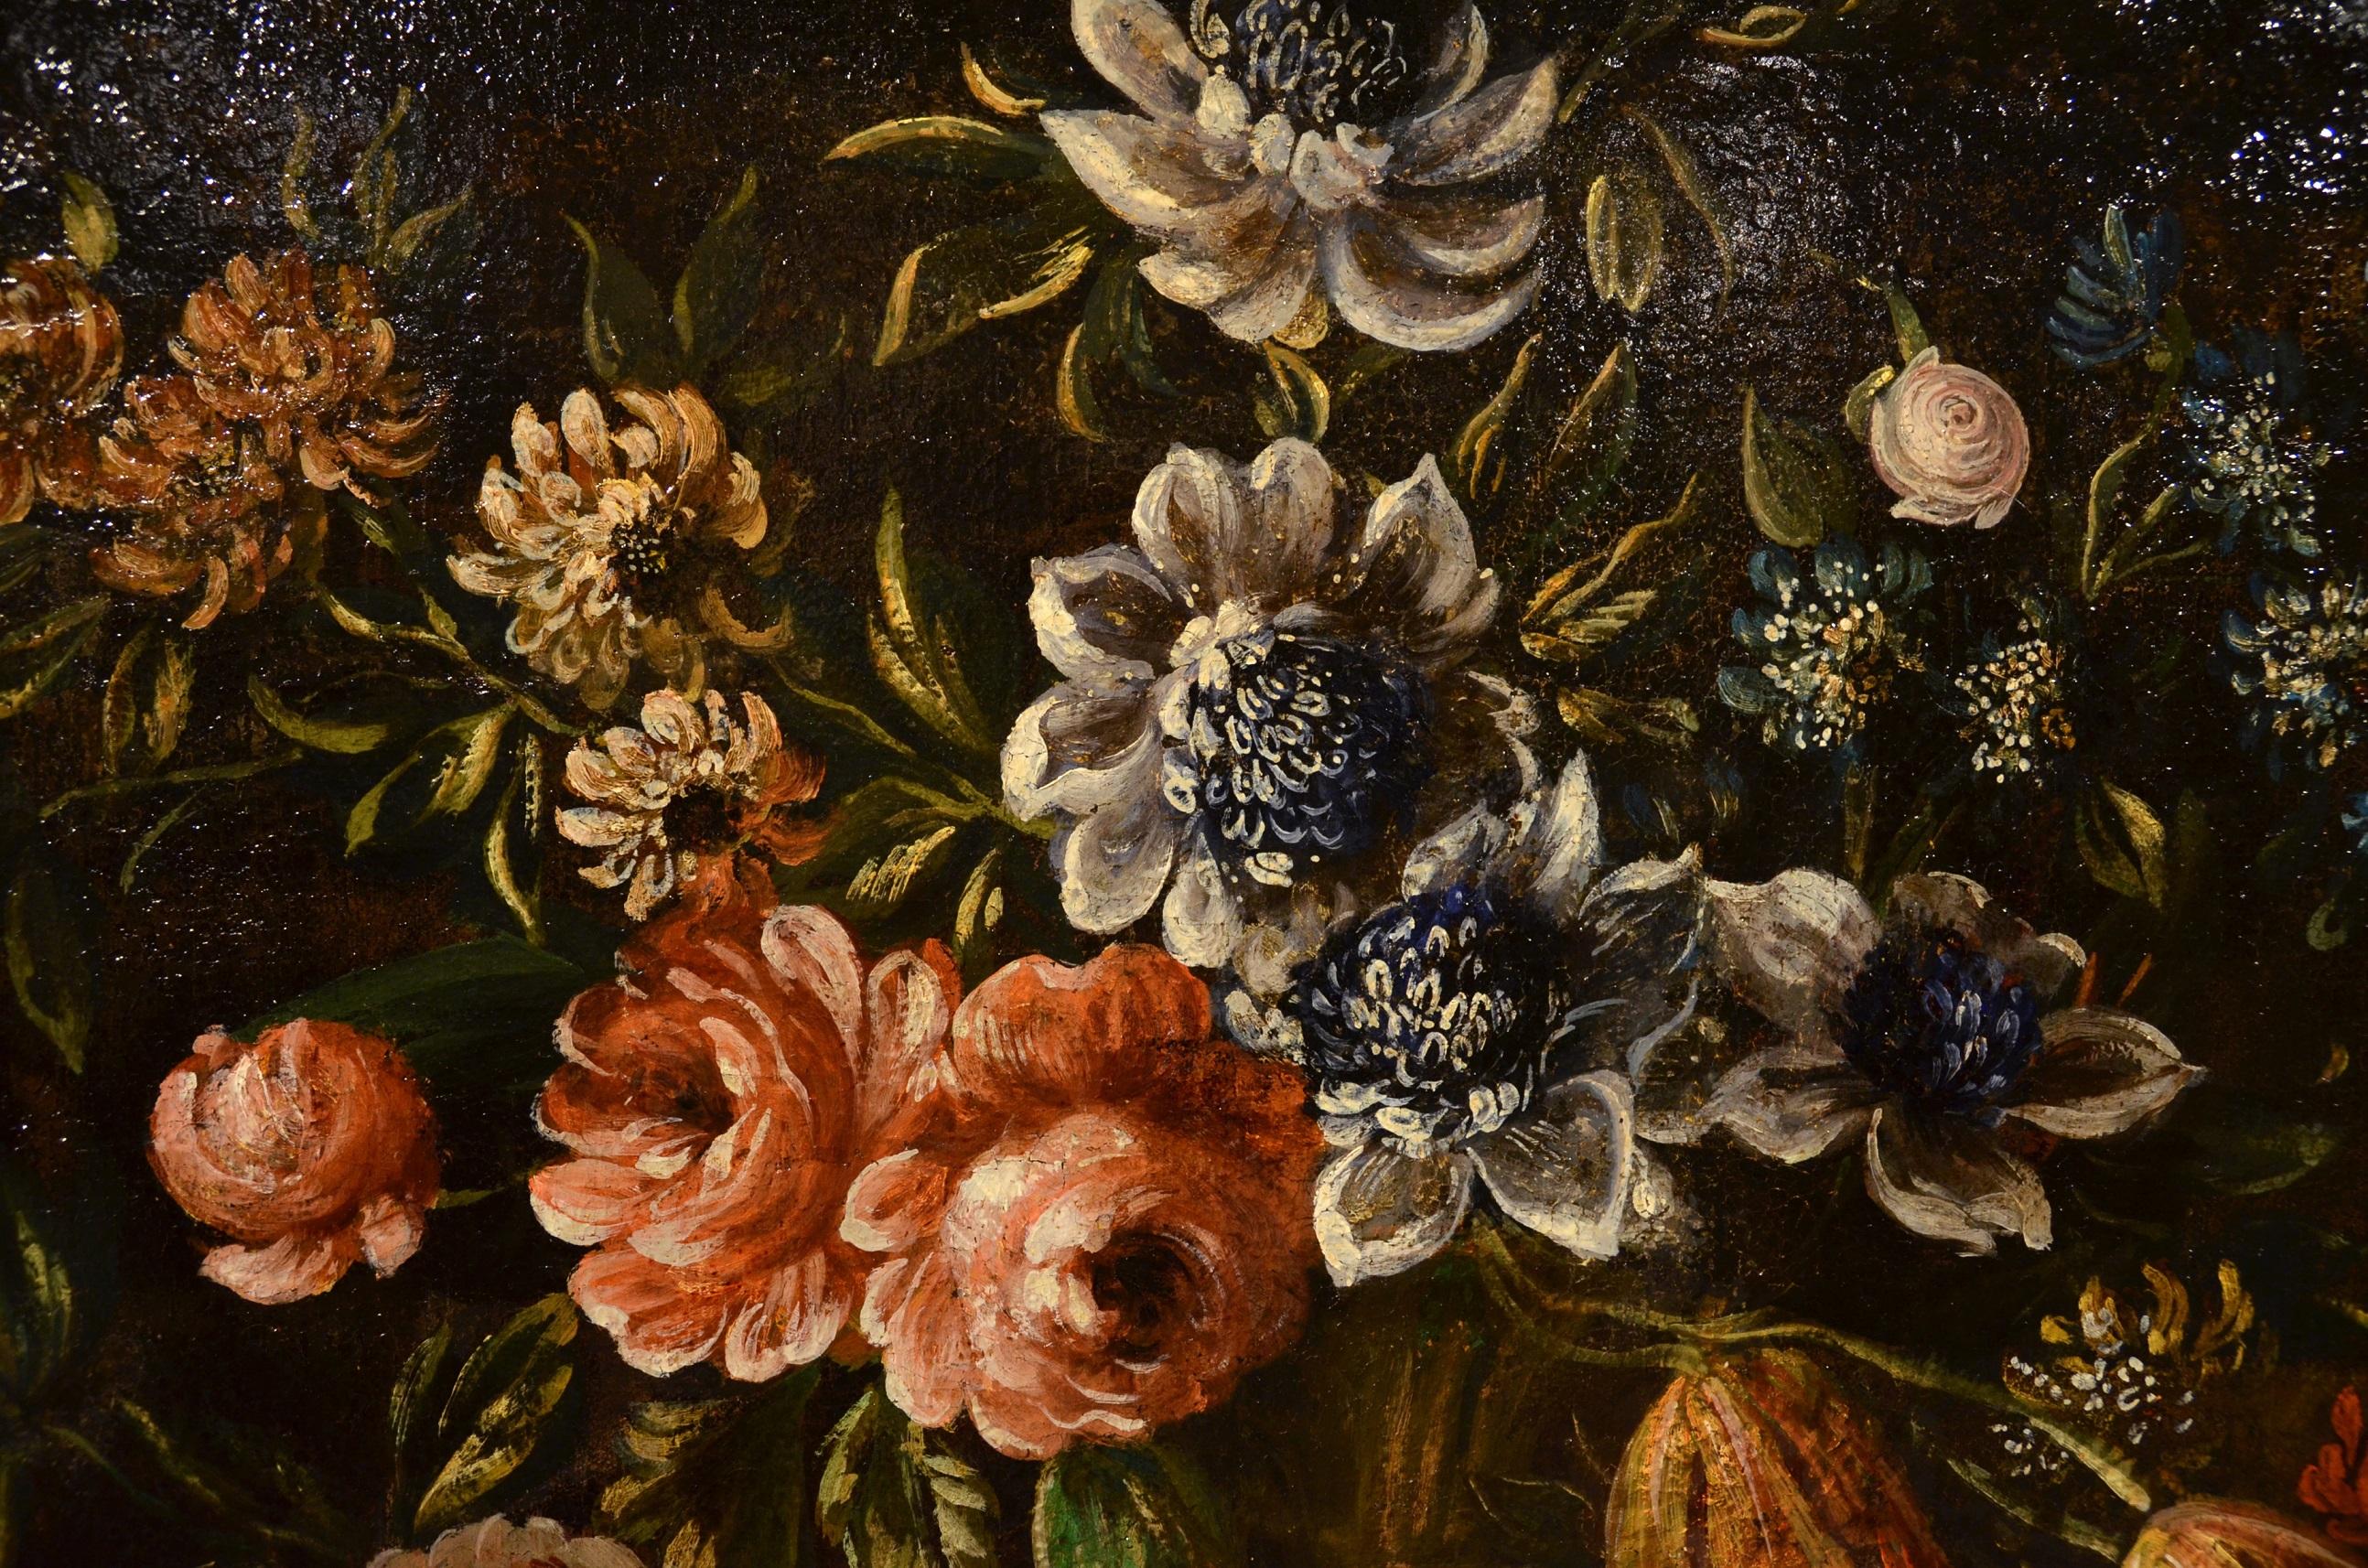 Flower Still Life Old Master 17th century Italy Paint Oil on canvas Quality Art - Old Masters Painting by Felice Fortunato Biggi, known as Felice de 'Fiori (Parma 1650 - Verona 1700 ca.), cercle of